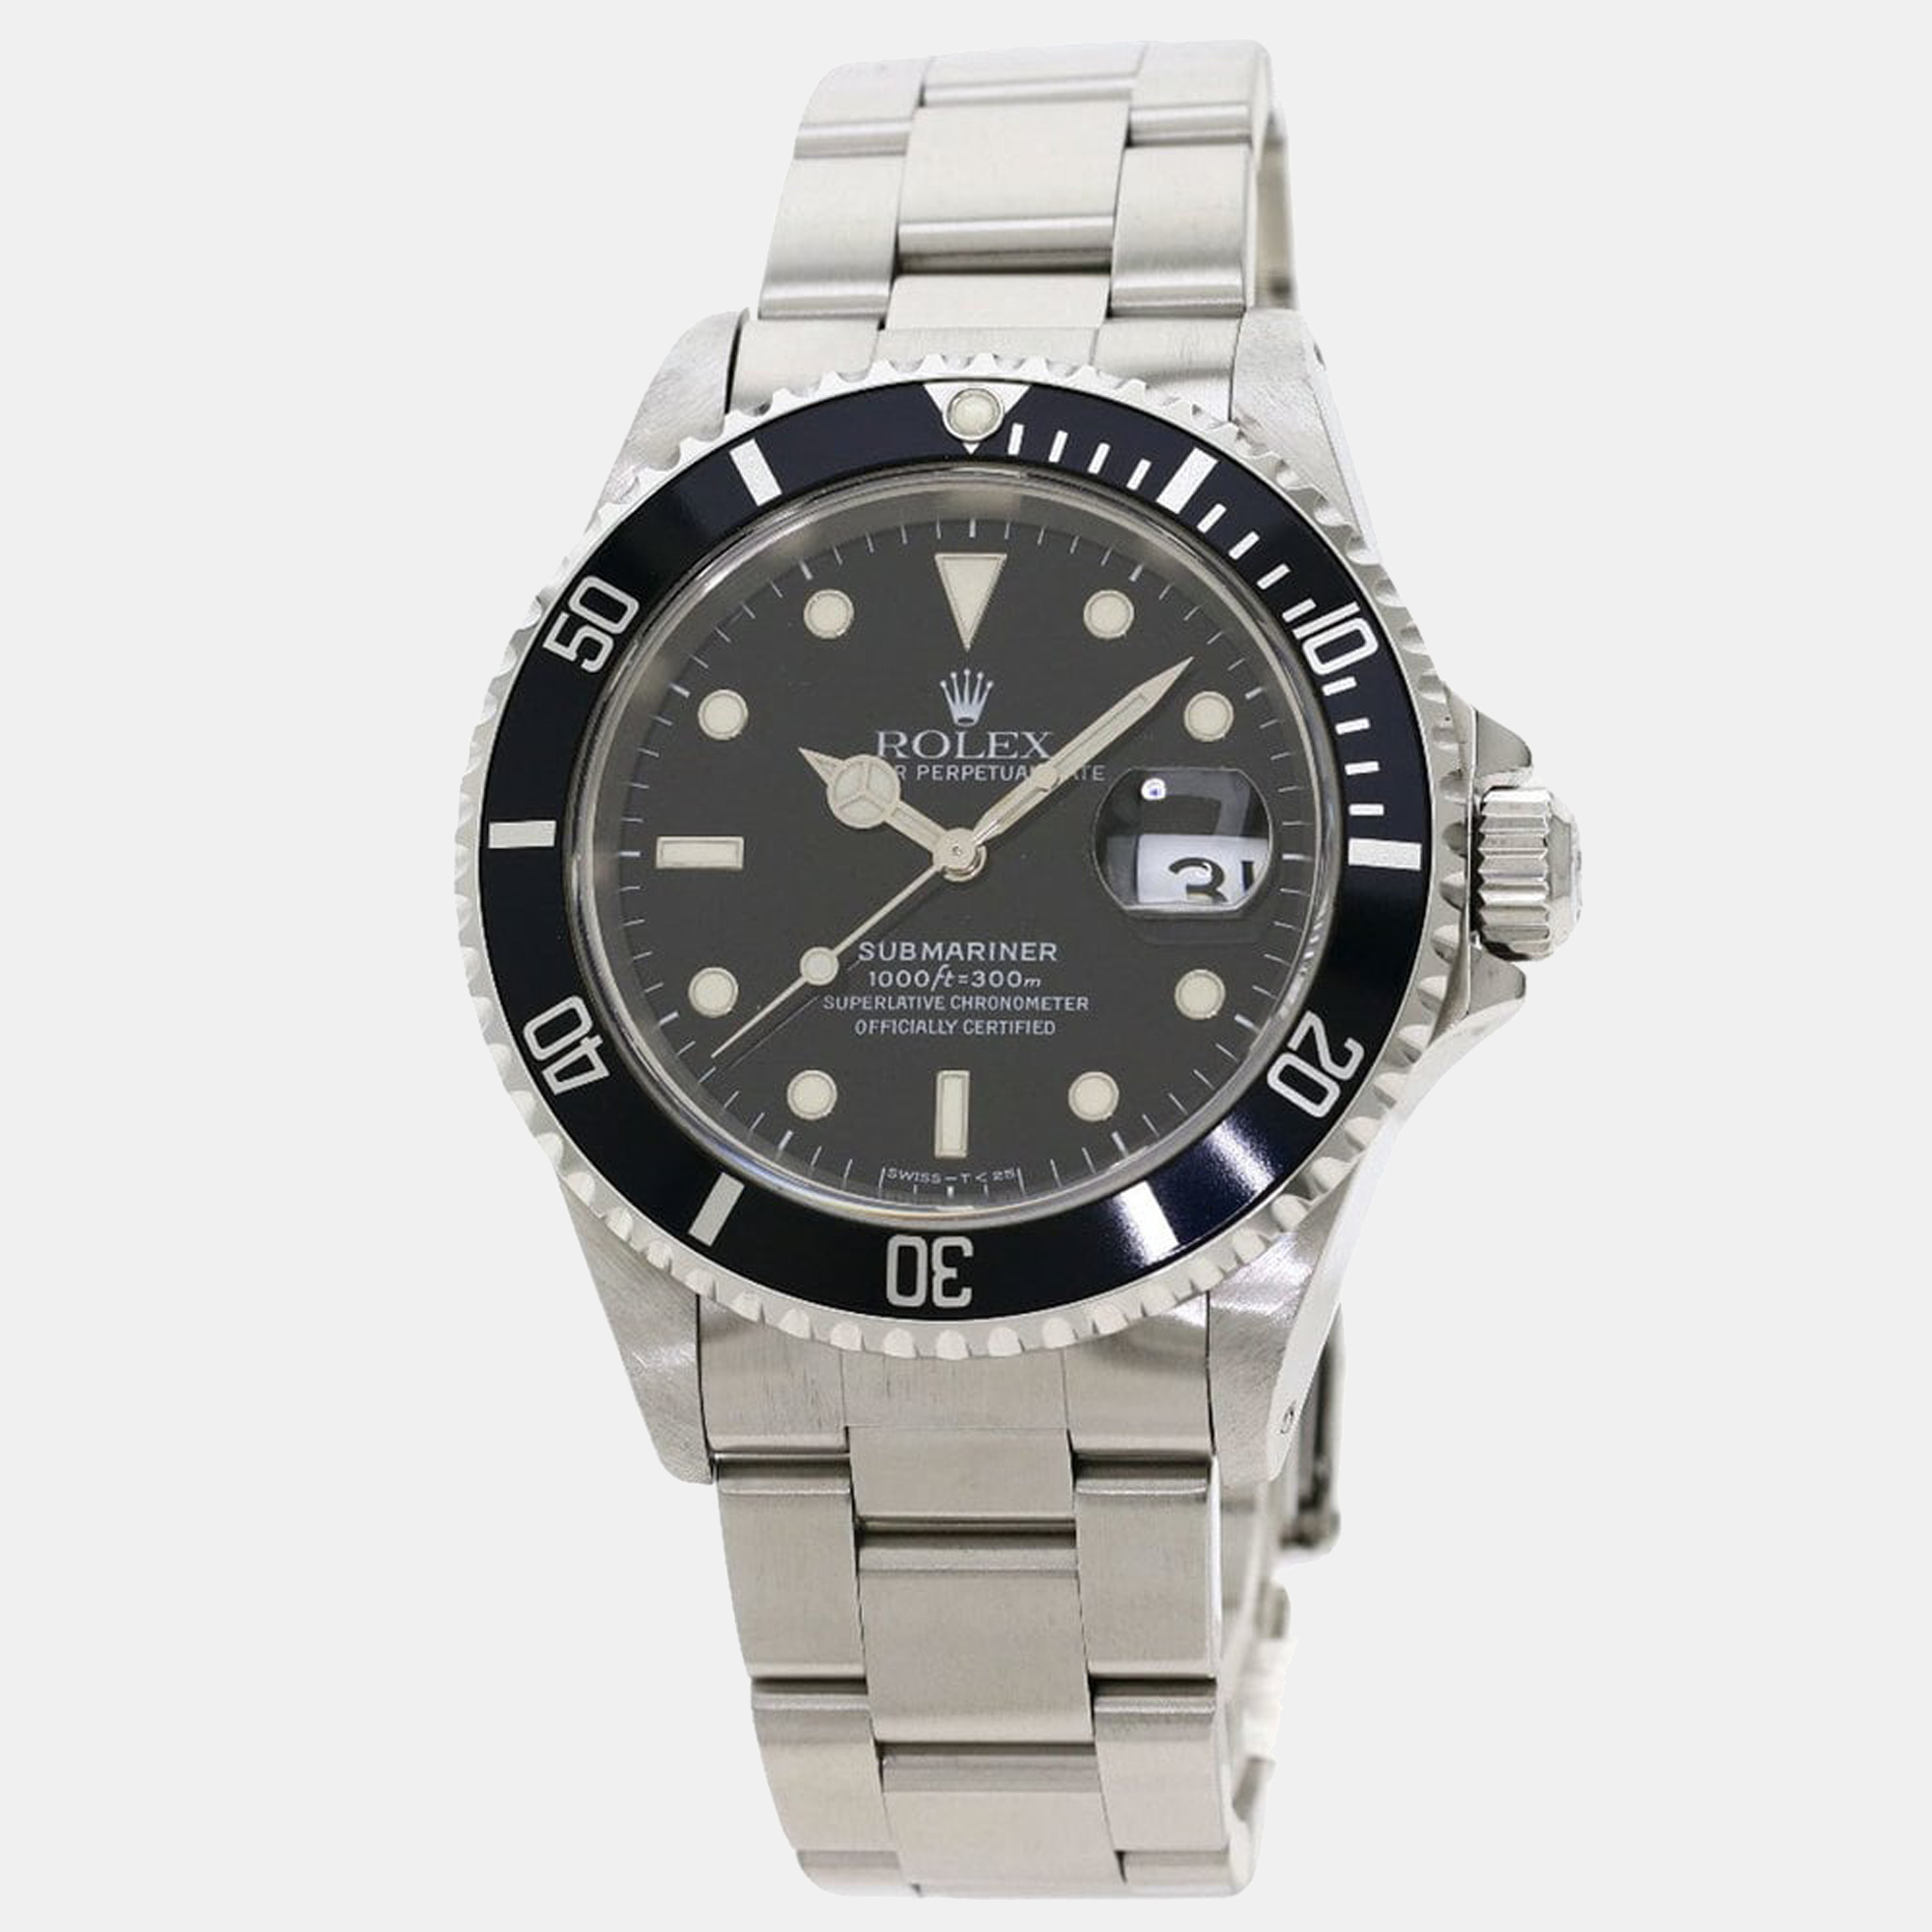 Pre-owned Rolex Black Stainless Steel Submariner 16610 Men's Wristwatch 40 Mm